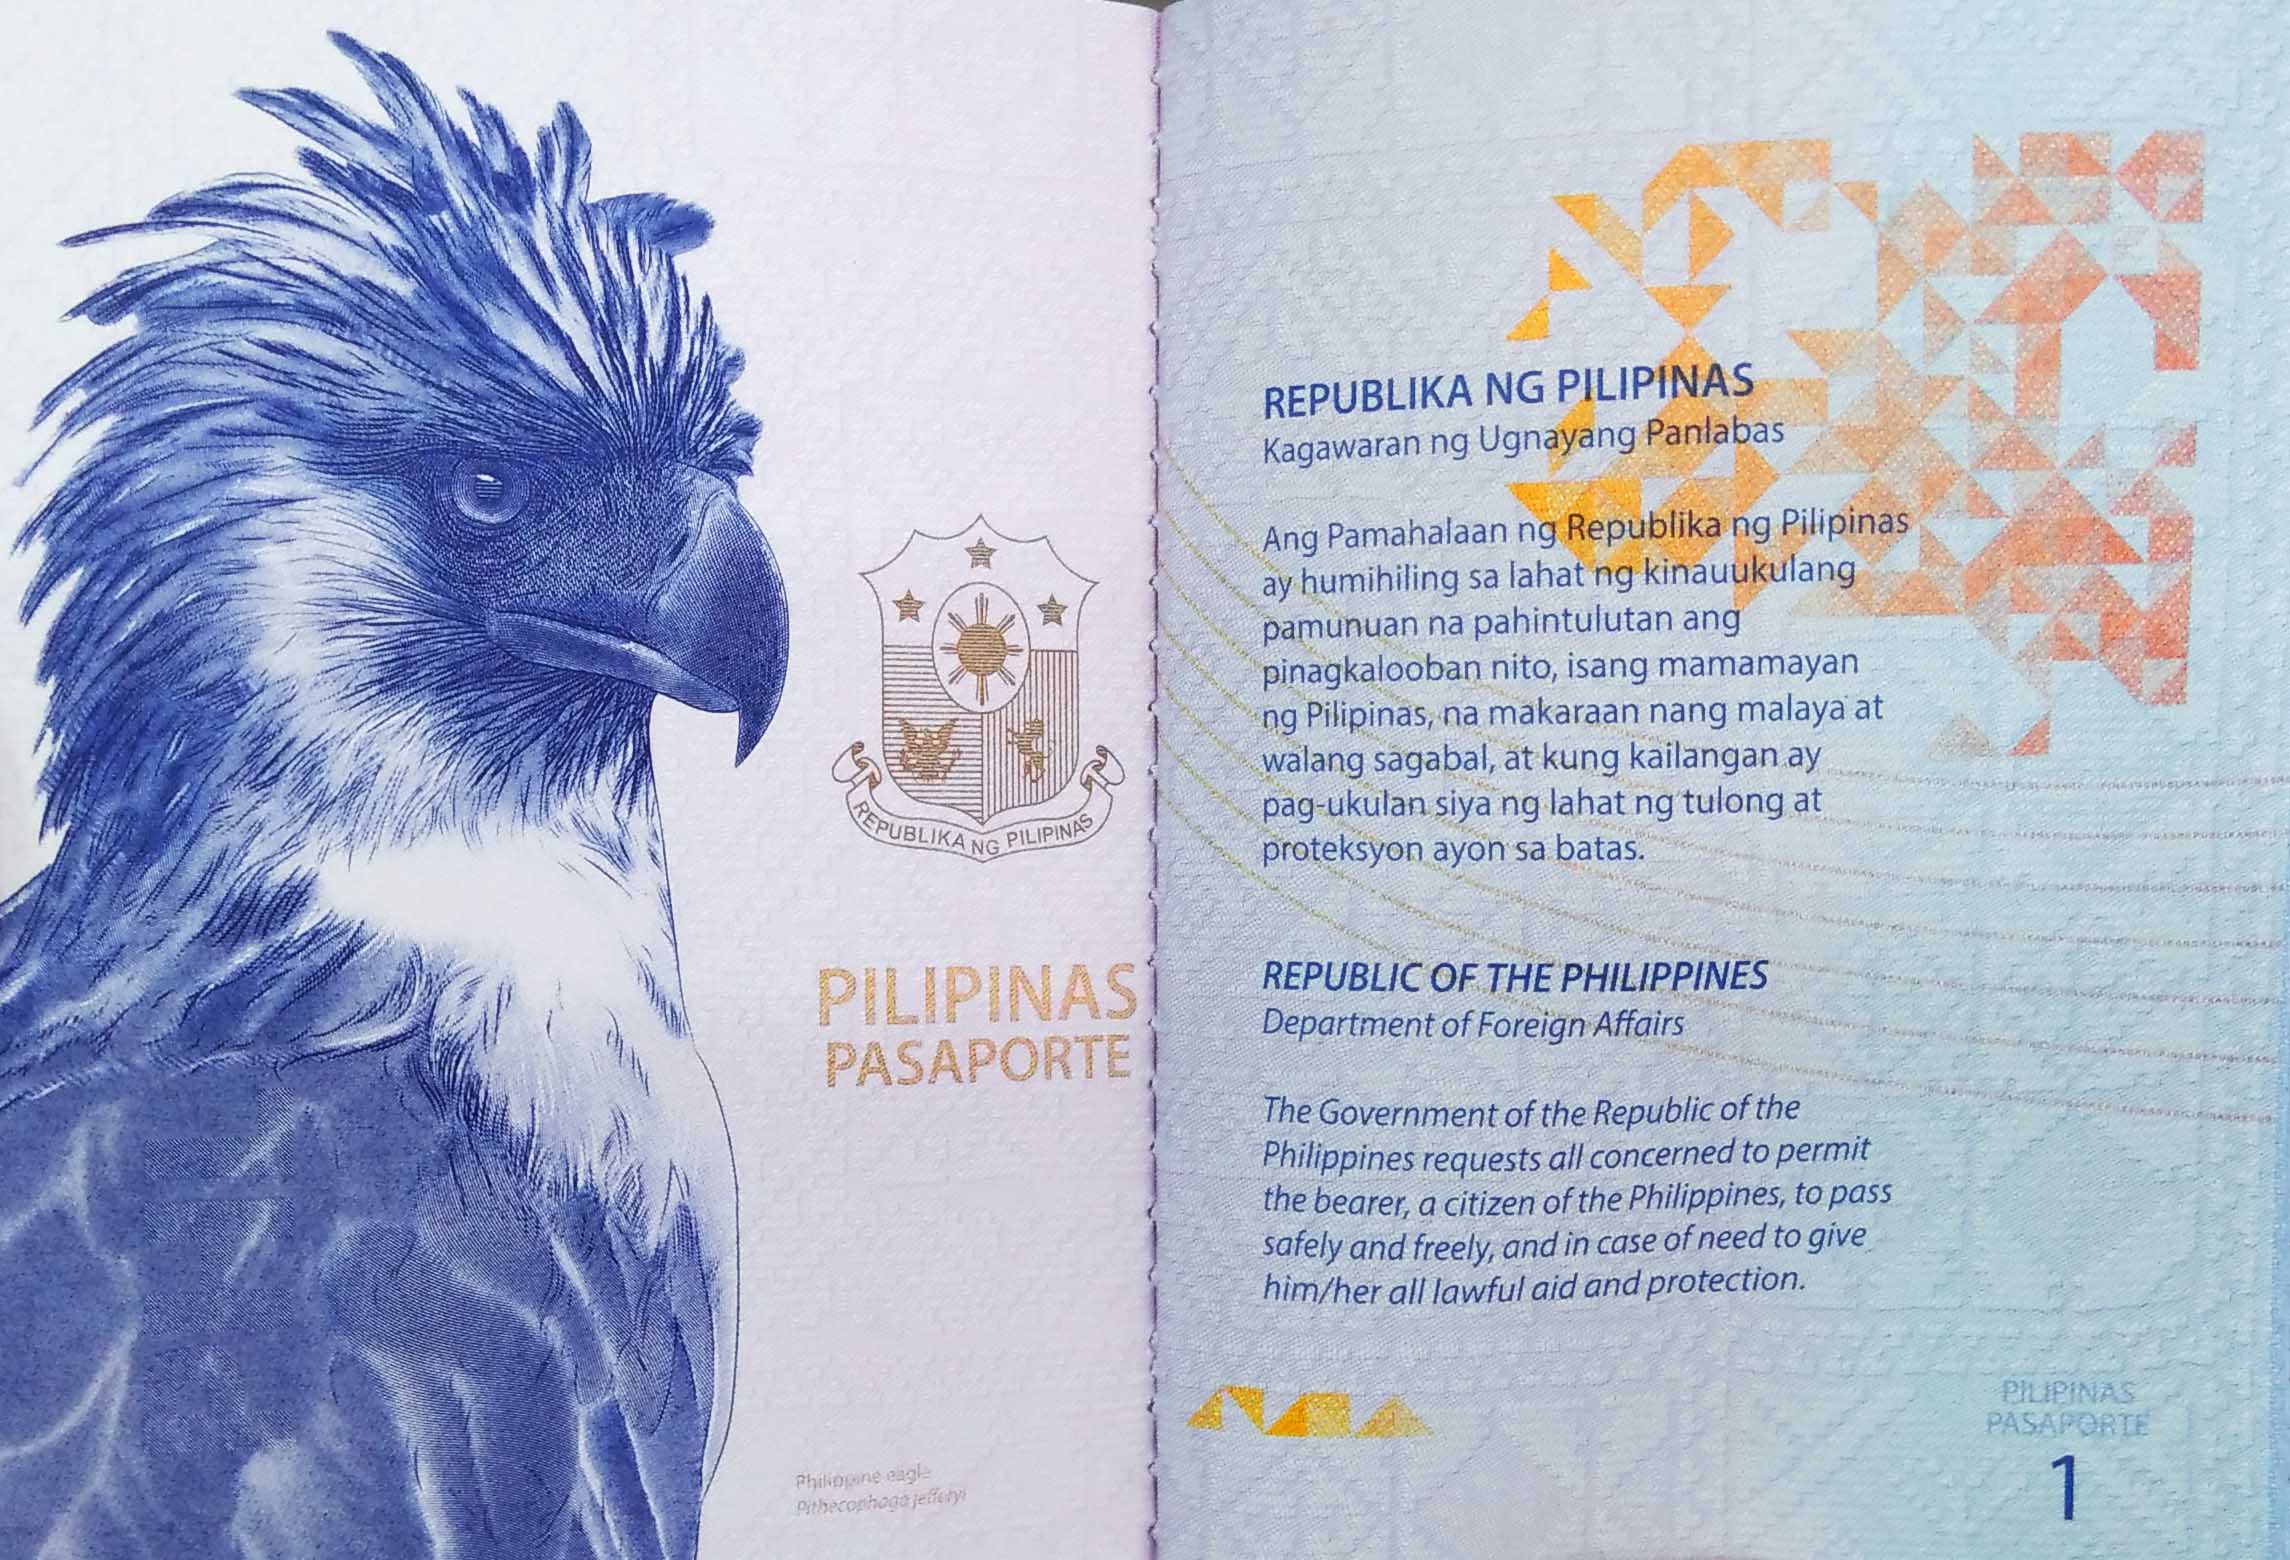 The first page of the new Philippine passport showing an image of the Philippine eagle.